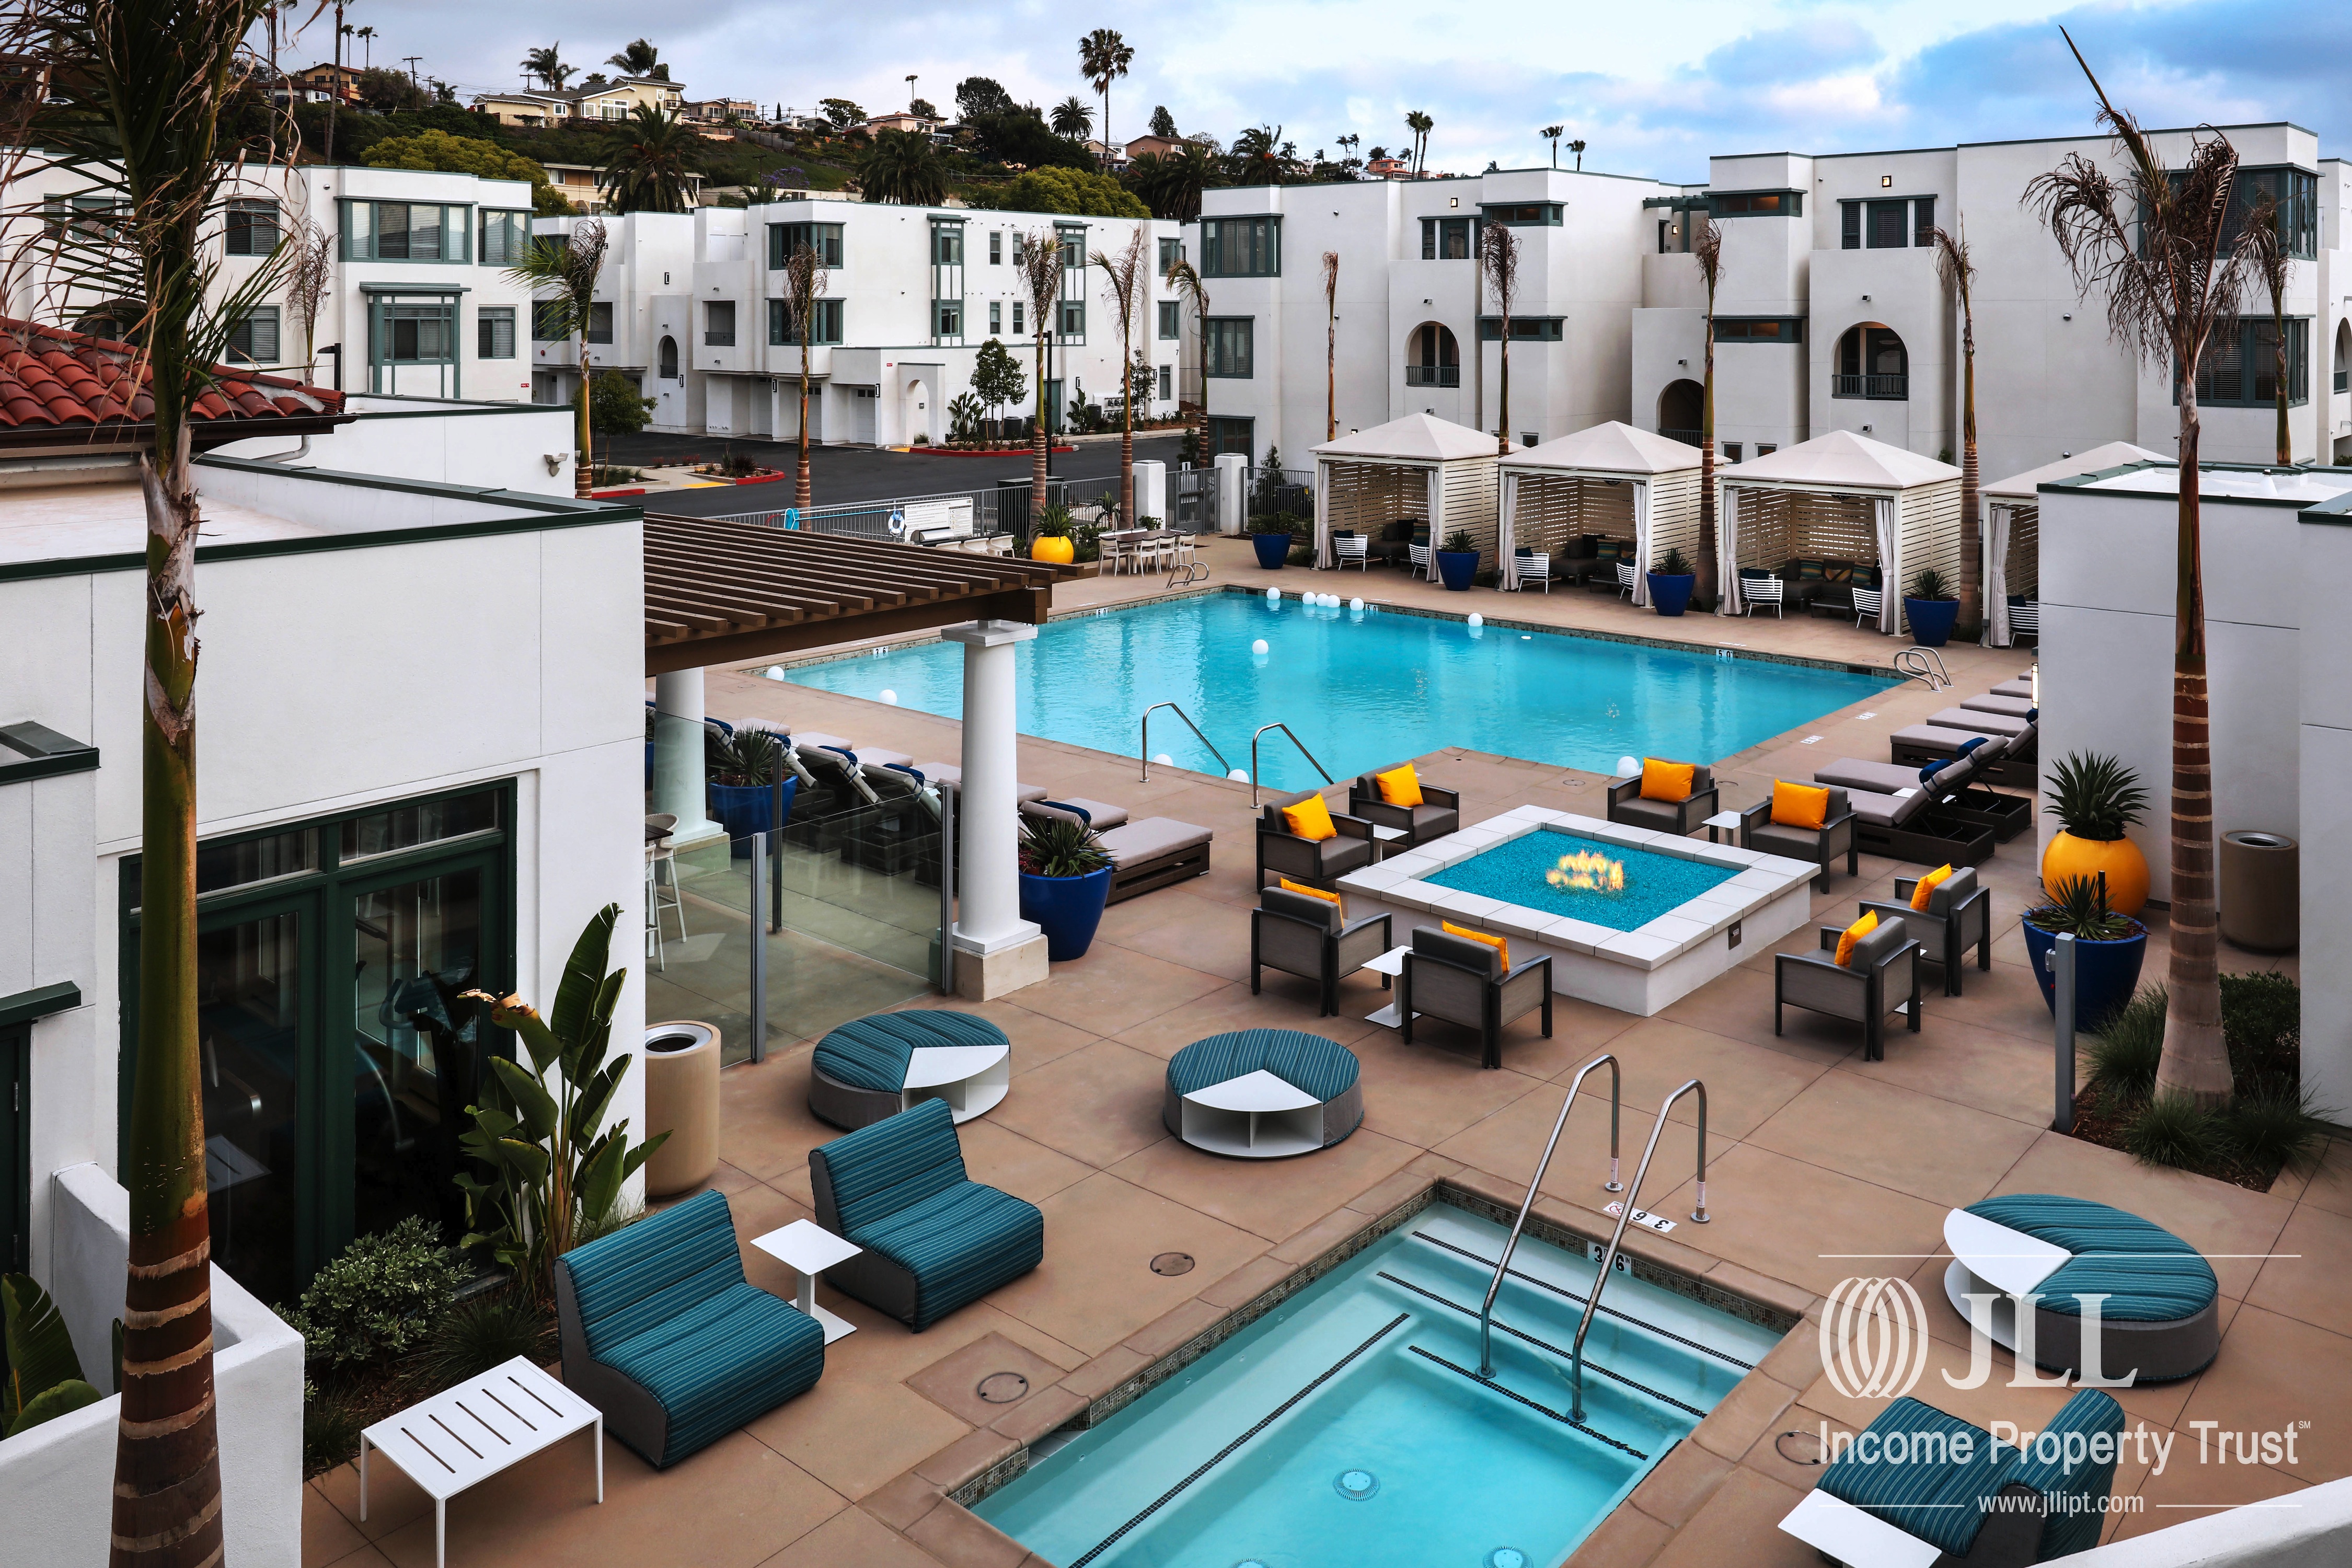 The 180-unit Dylan Point Loma apartment community. (Courtesy JLL Income Property Trust)